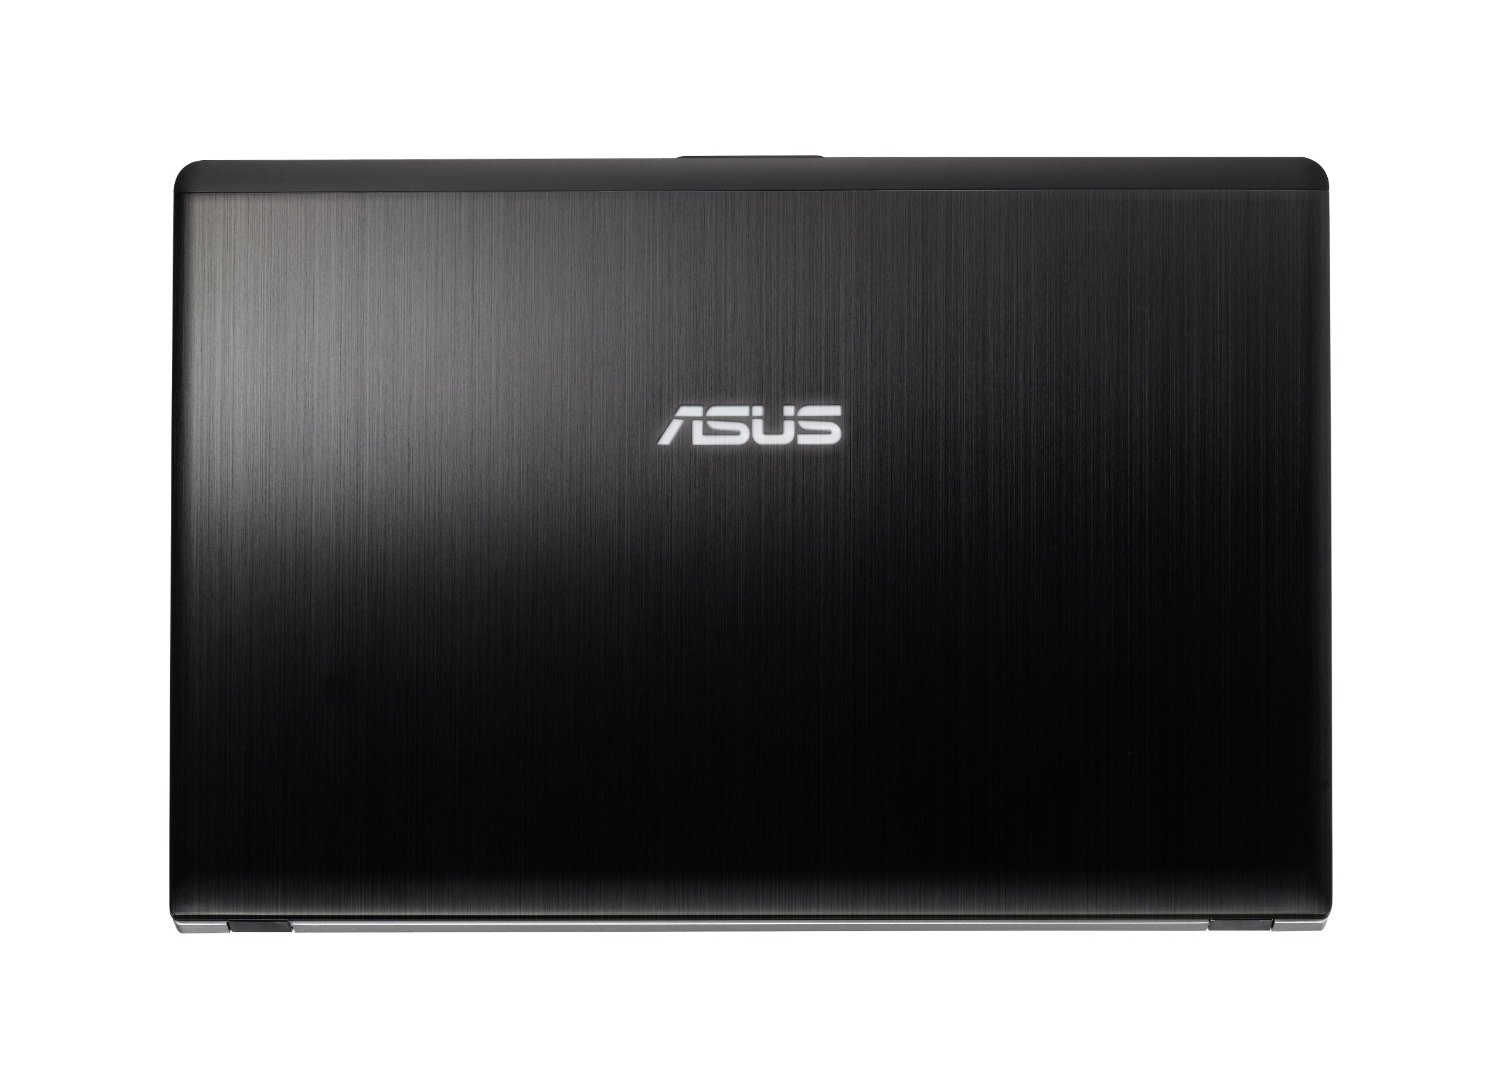 ASUS N56VJ-DH71 15.6-Inch Full-HD 1080P Laptop, The Price and Product